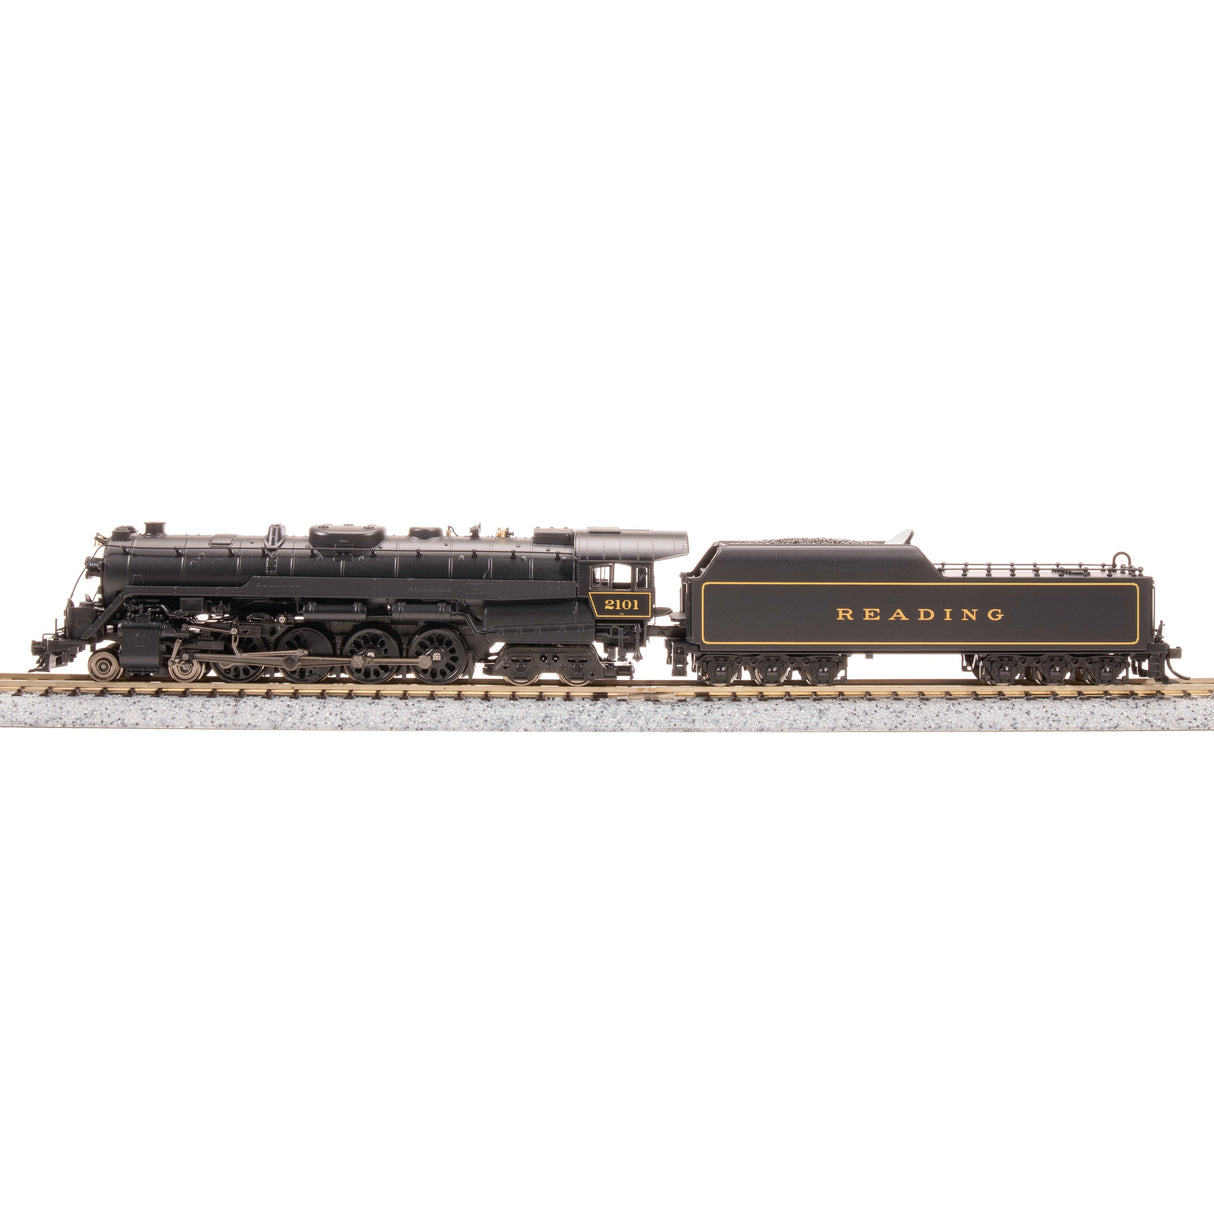 Broadway Limited N Scale Reading T-1 4-8-4 Steam Locomotive #2115/In-Service DC/DCC Sound